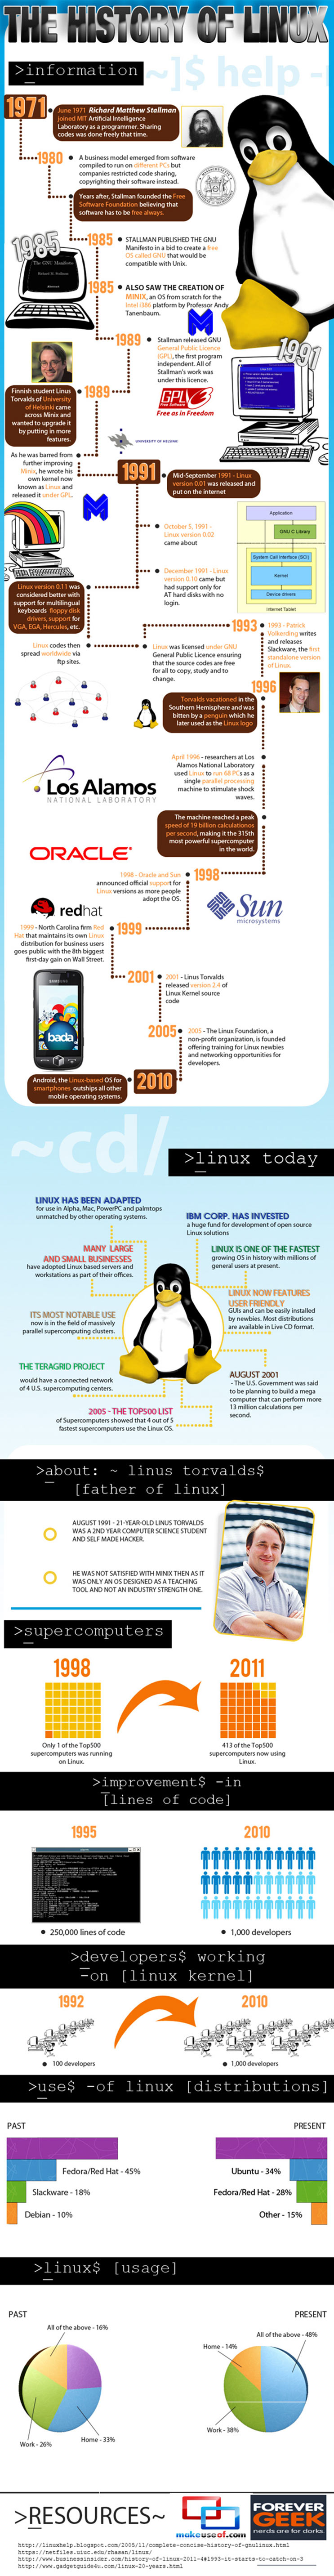 The History of Linux Infographic